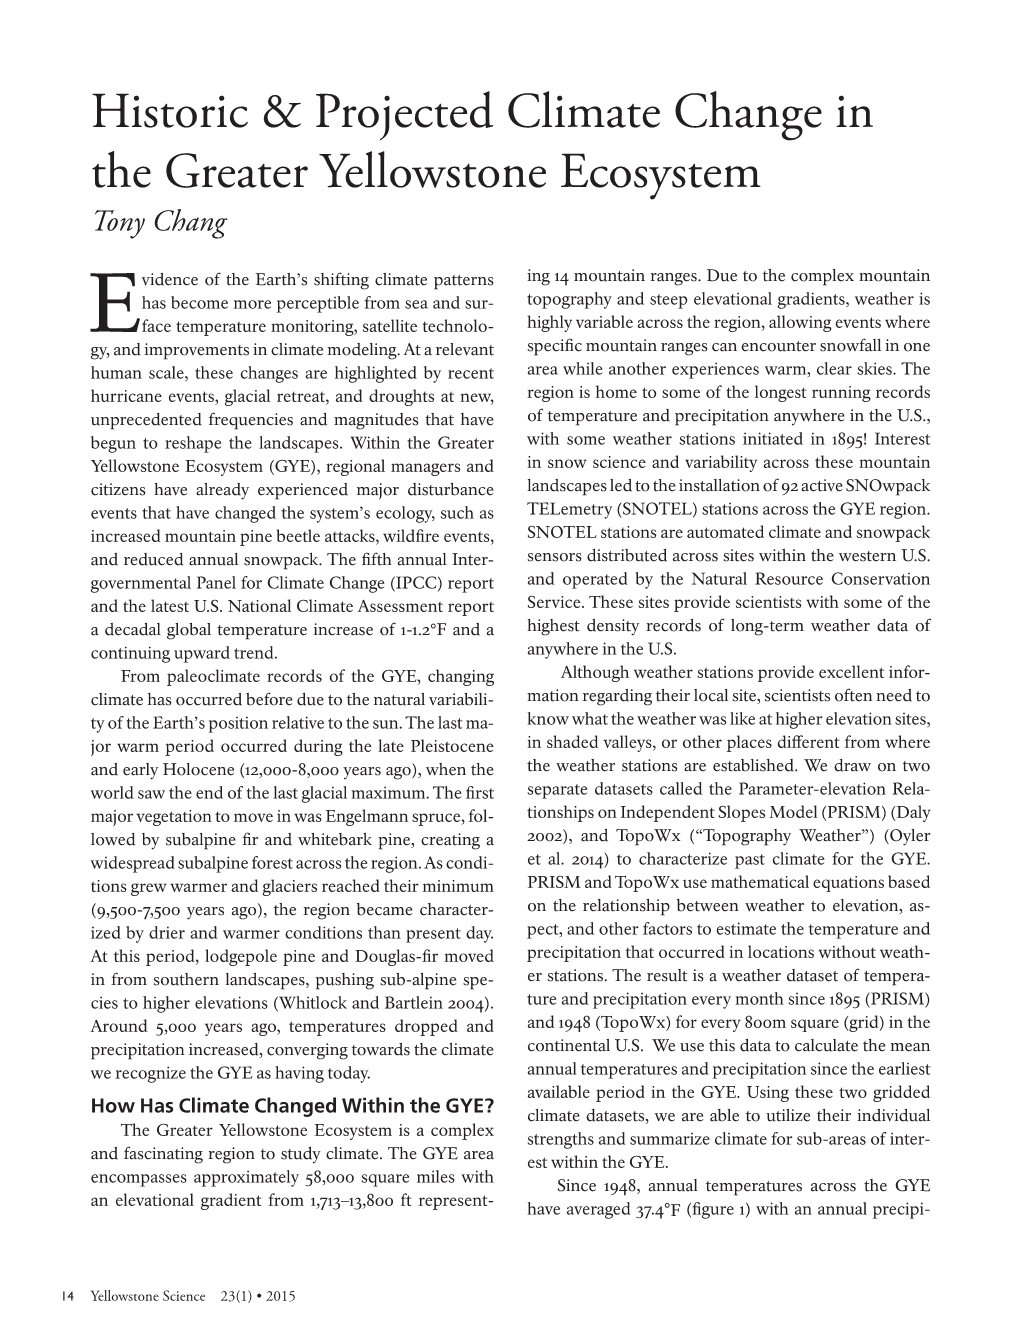 Historic & Projected Climate Change in the Greater Yellowstone Ecosystem